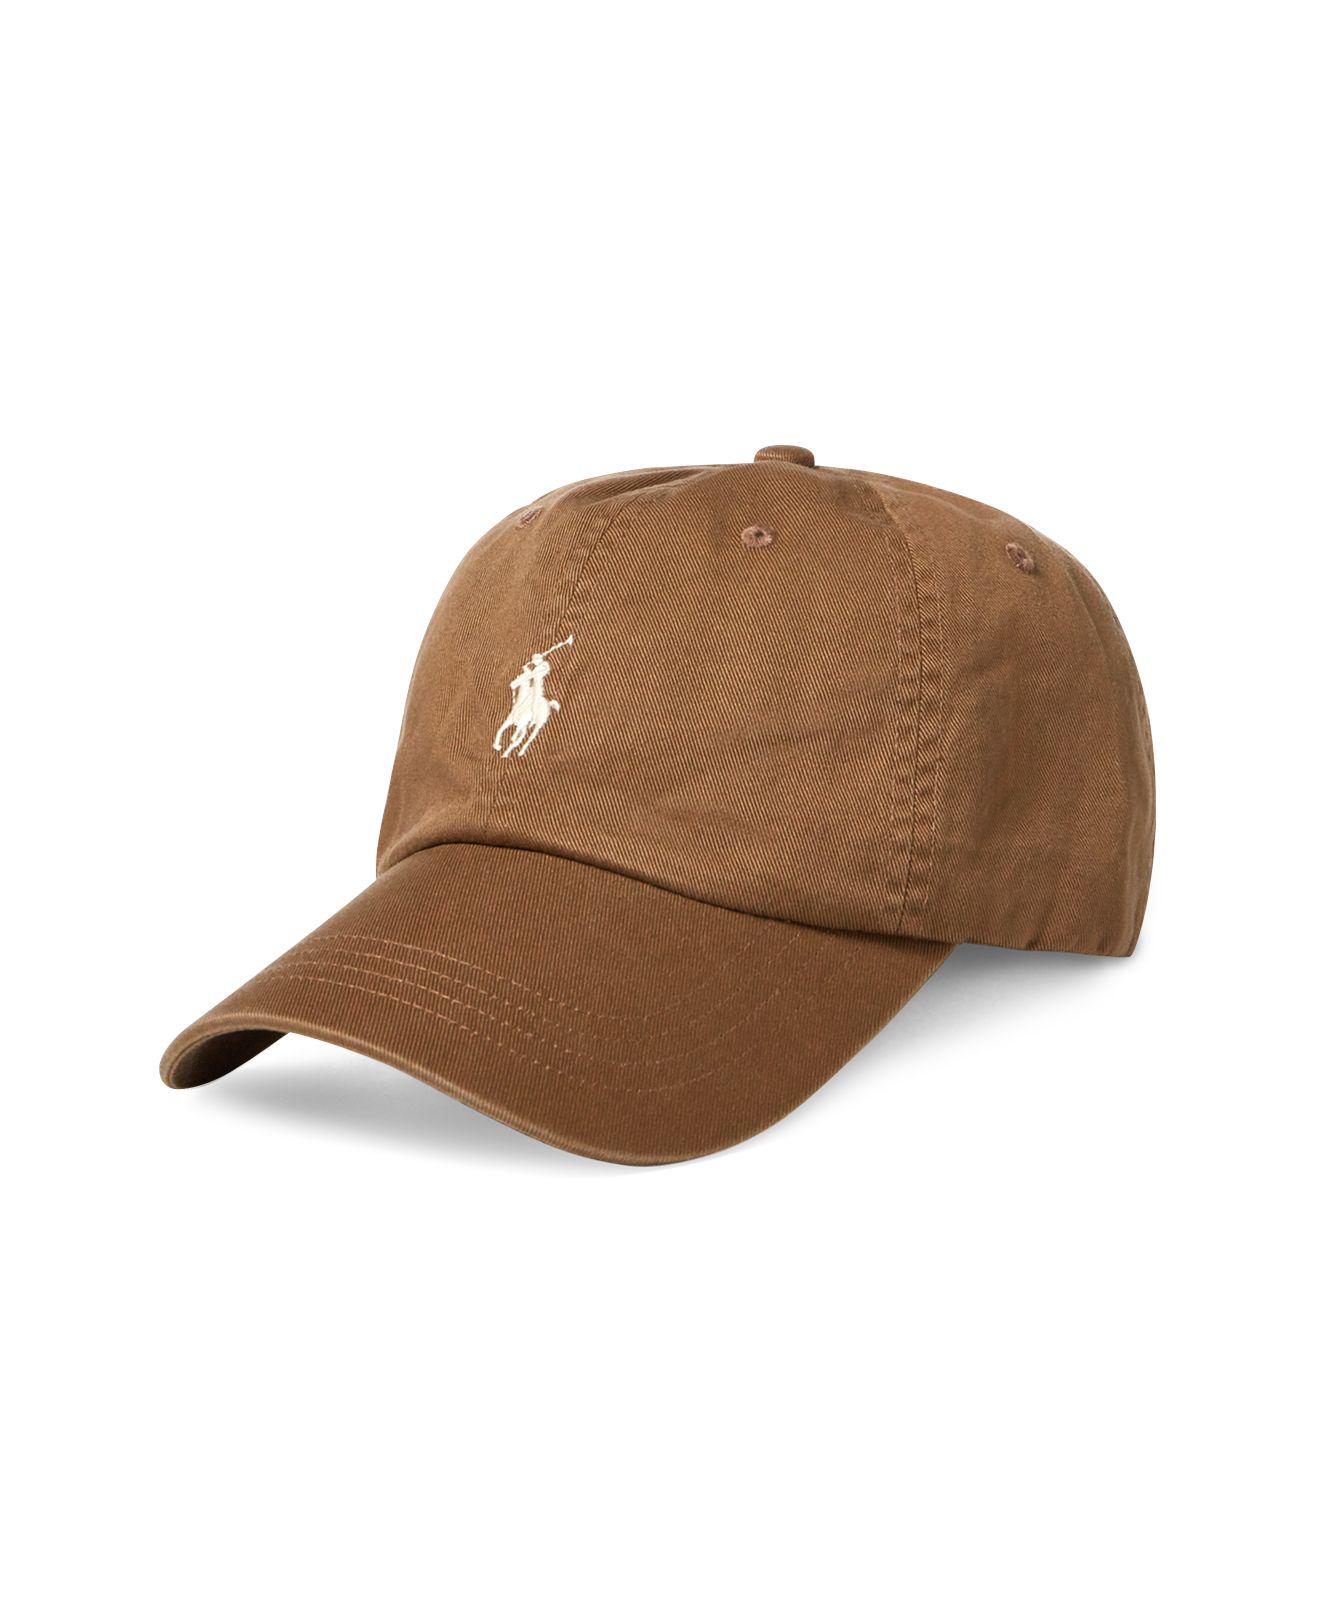 Polo Ralph Lauren Cotton Chino Sports Cap in Brown for Men - Lyst